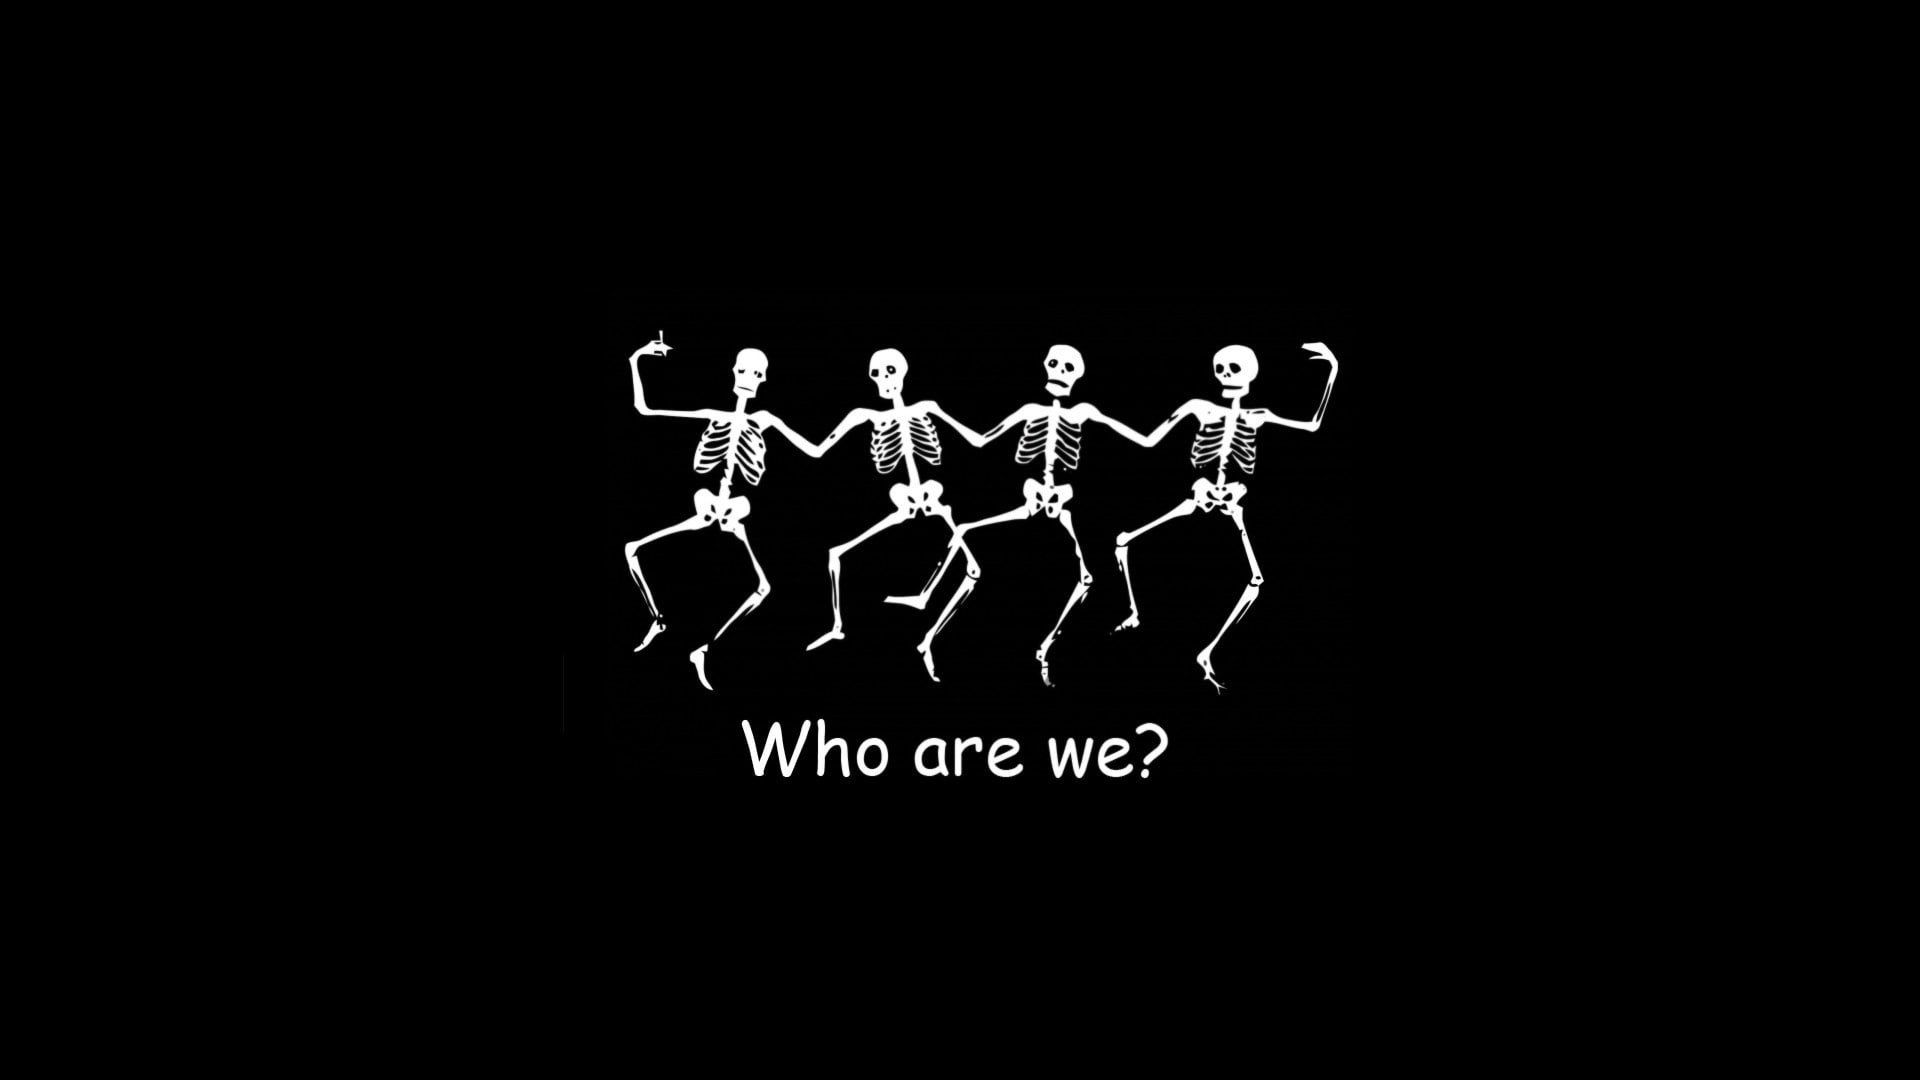 Who are we wallpaper - Skeleton